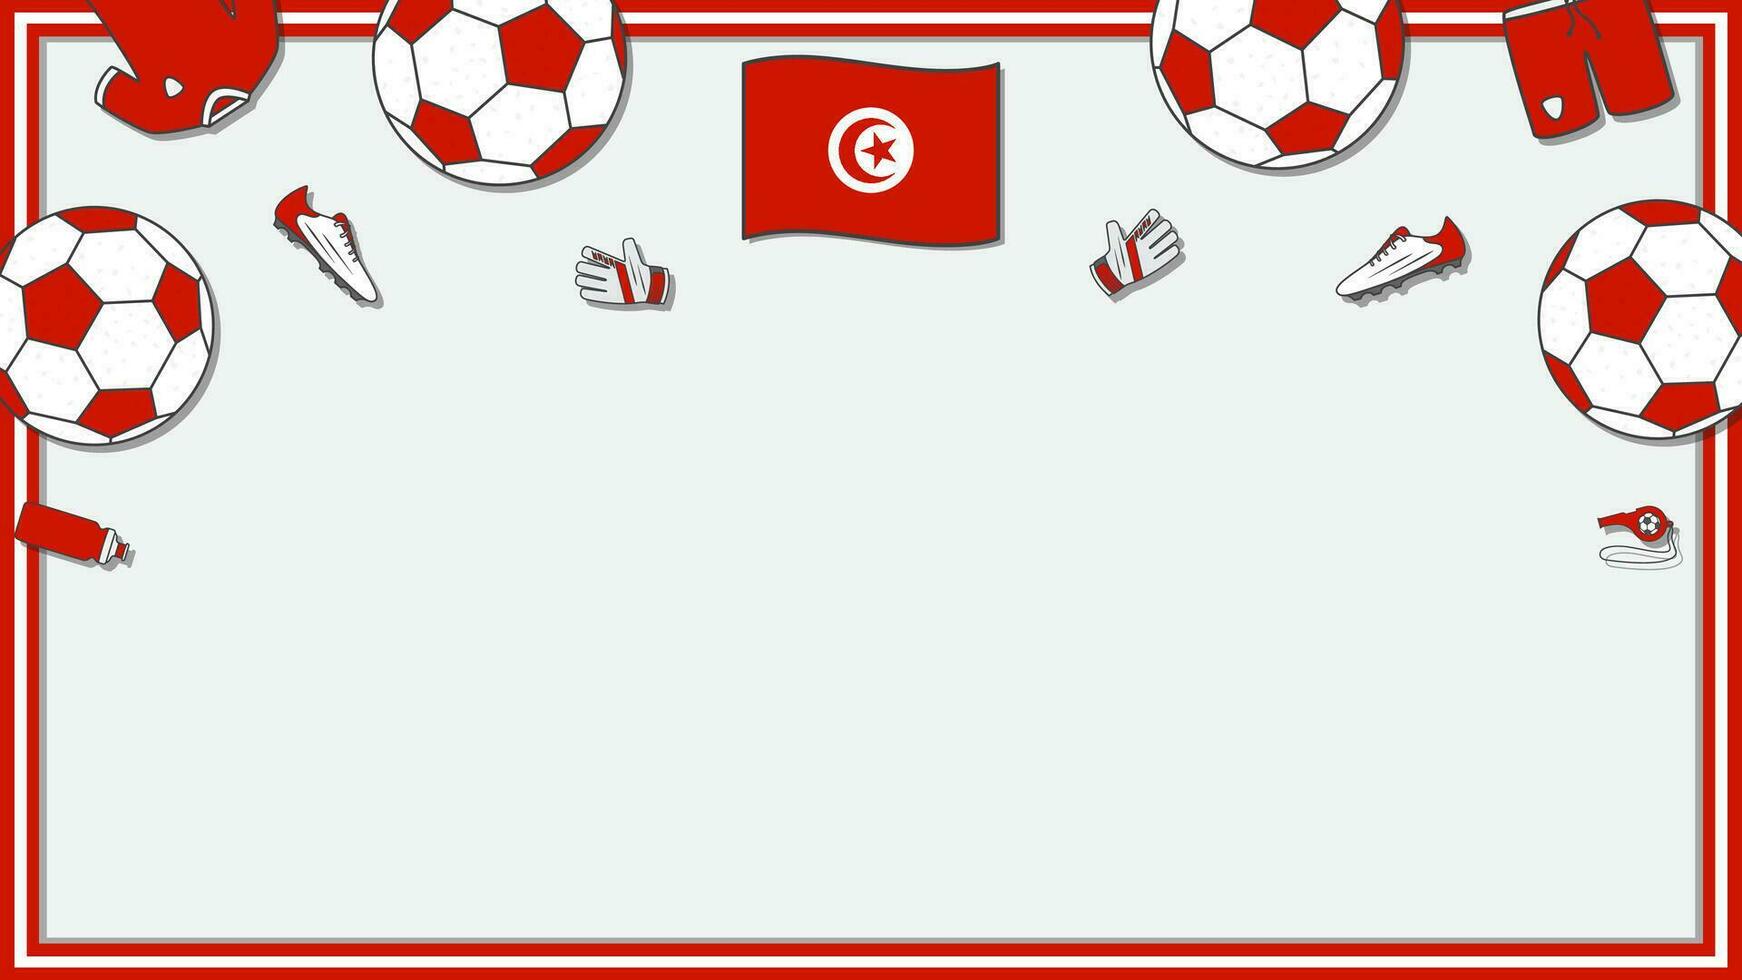 Football Background Design Template. Football Cartoon Vector Illustration. Competition In Tunisia